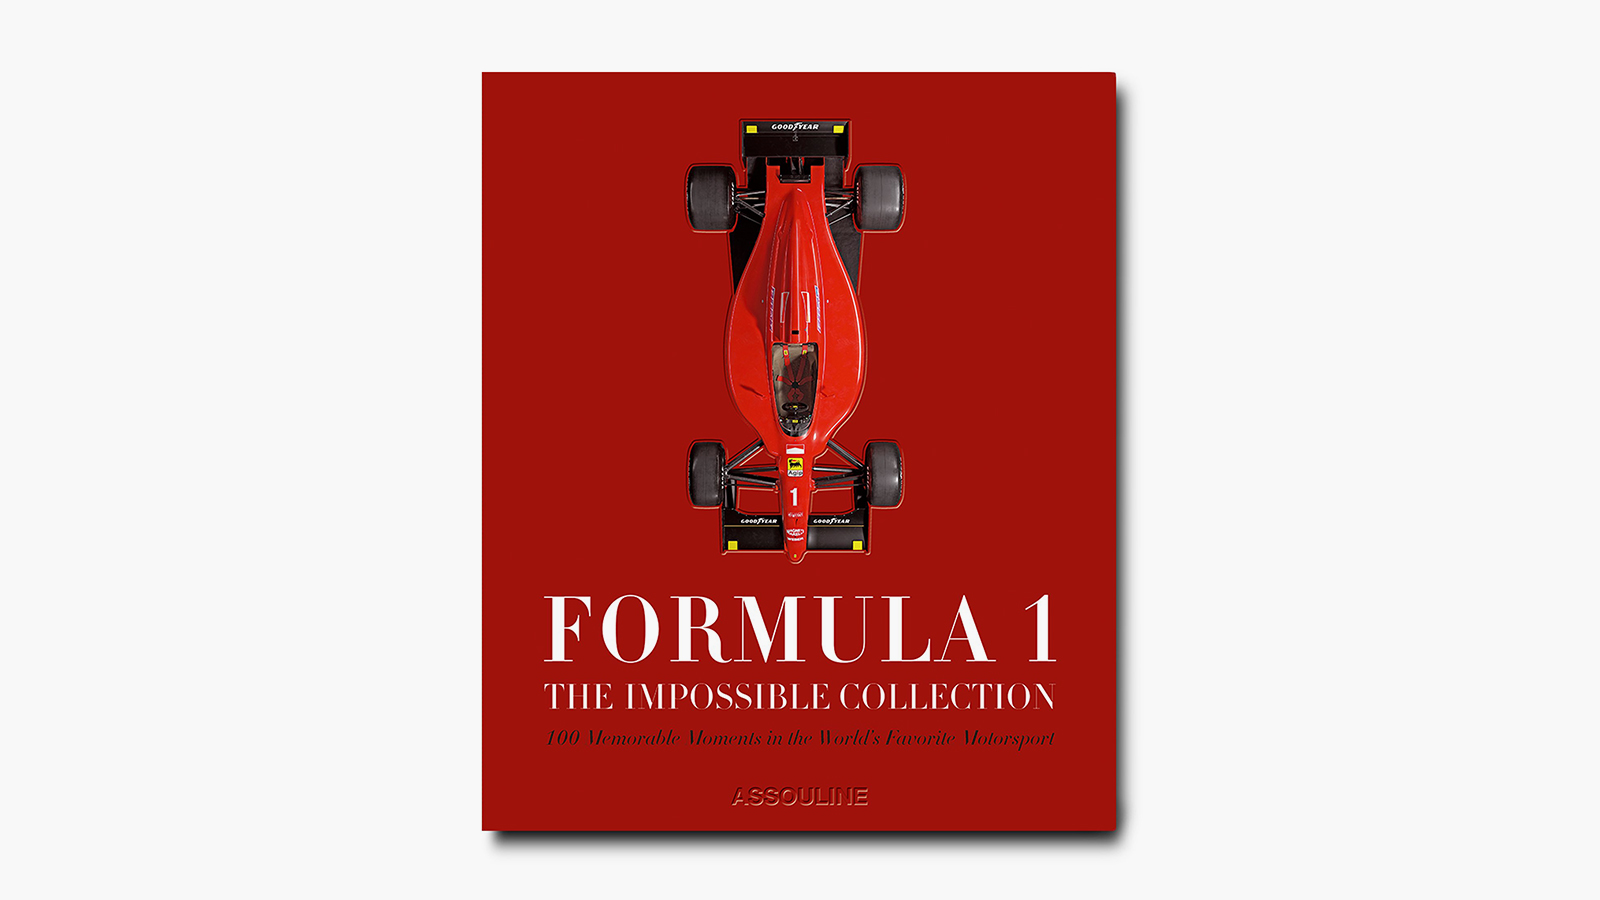 'Formula 1: The Impossible Collection' by Assouline